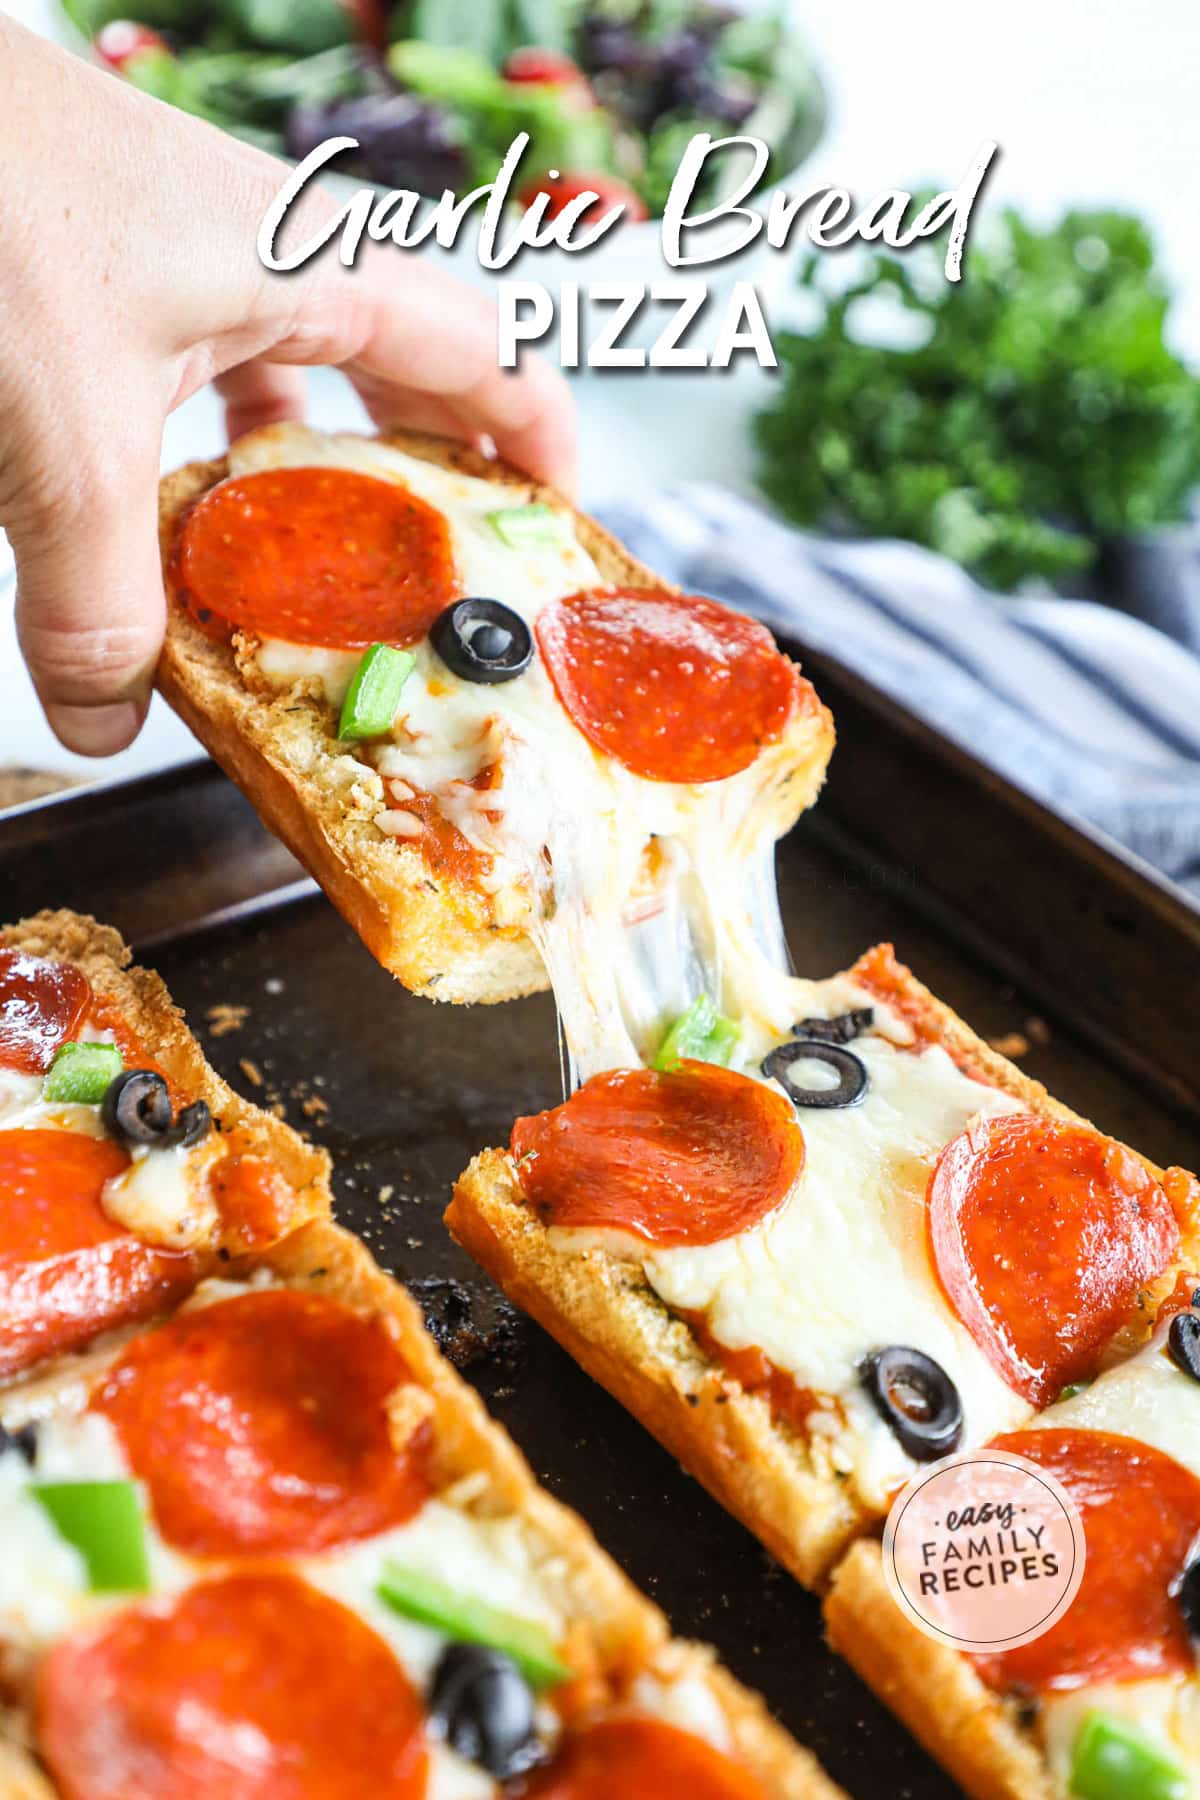 Garlic bread pizza with supreme toppings being pulled with gooey cheese.